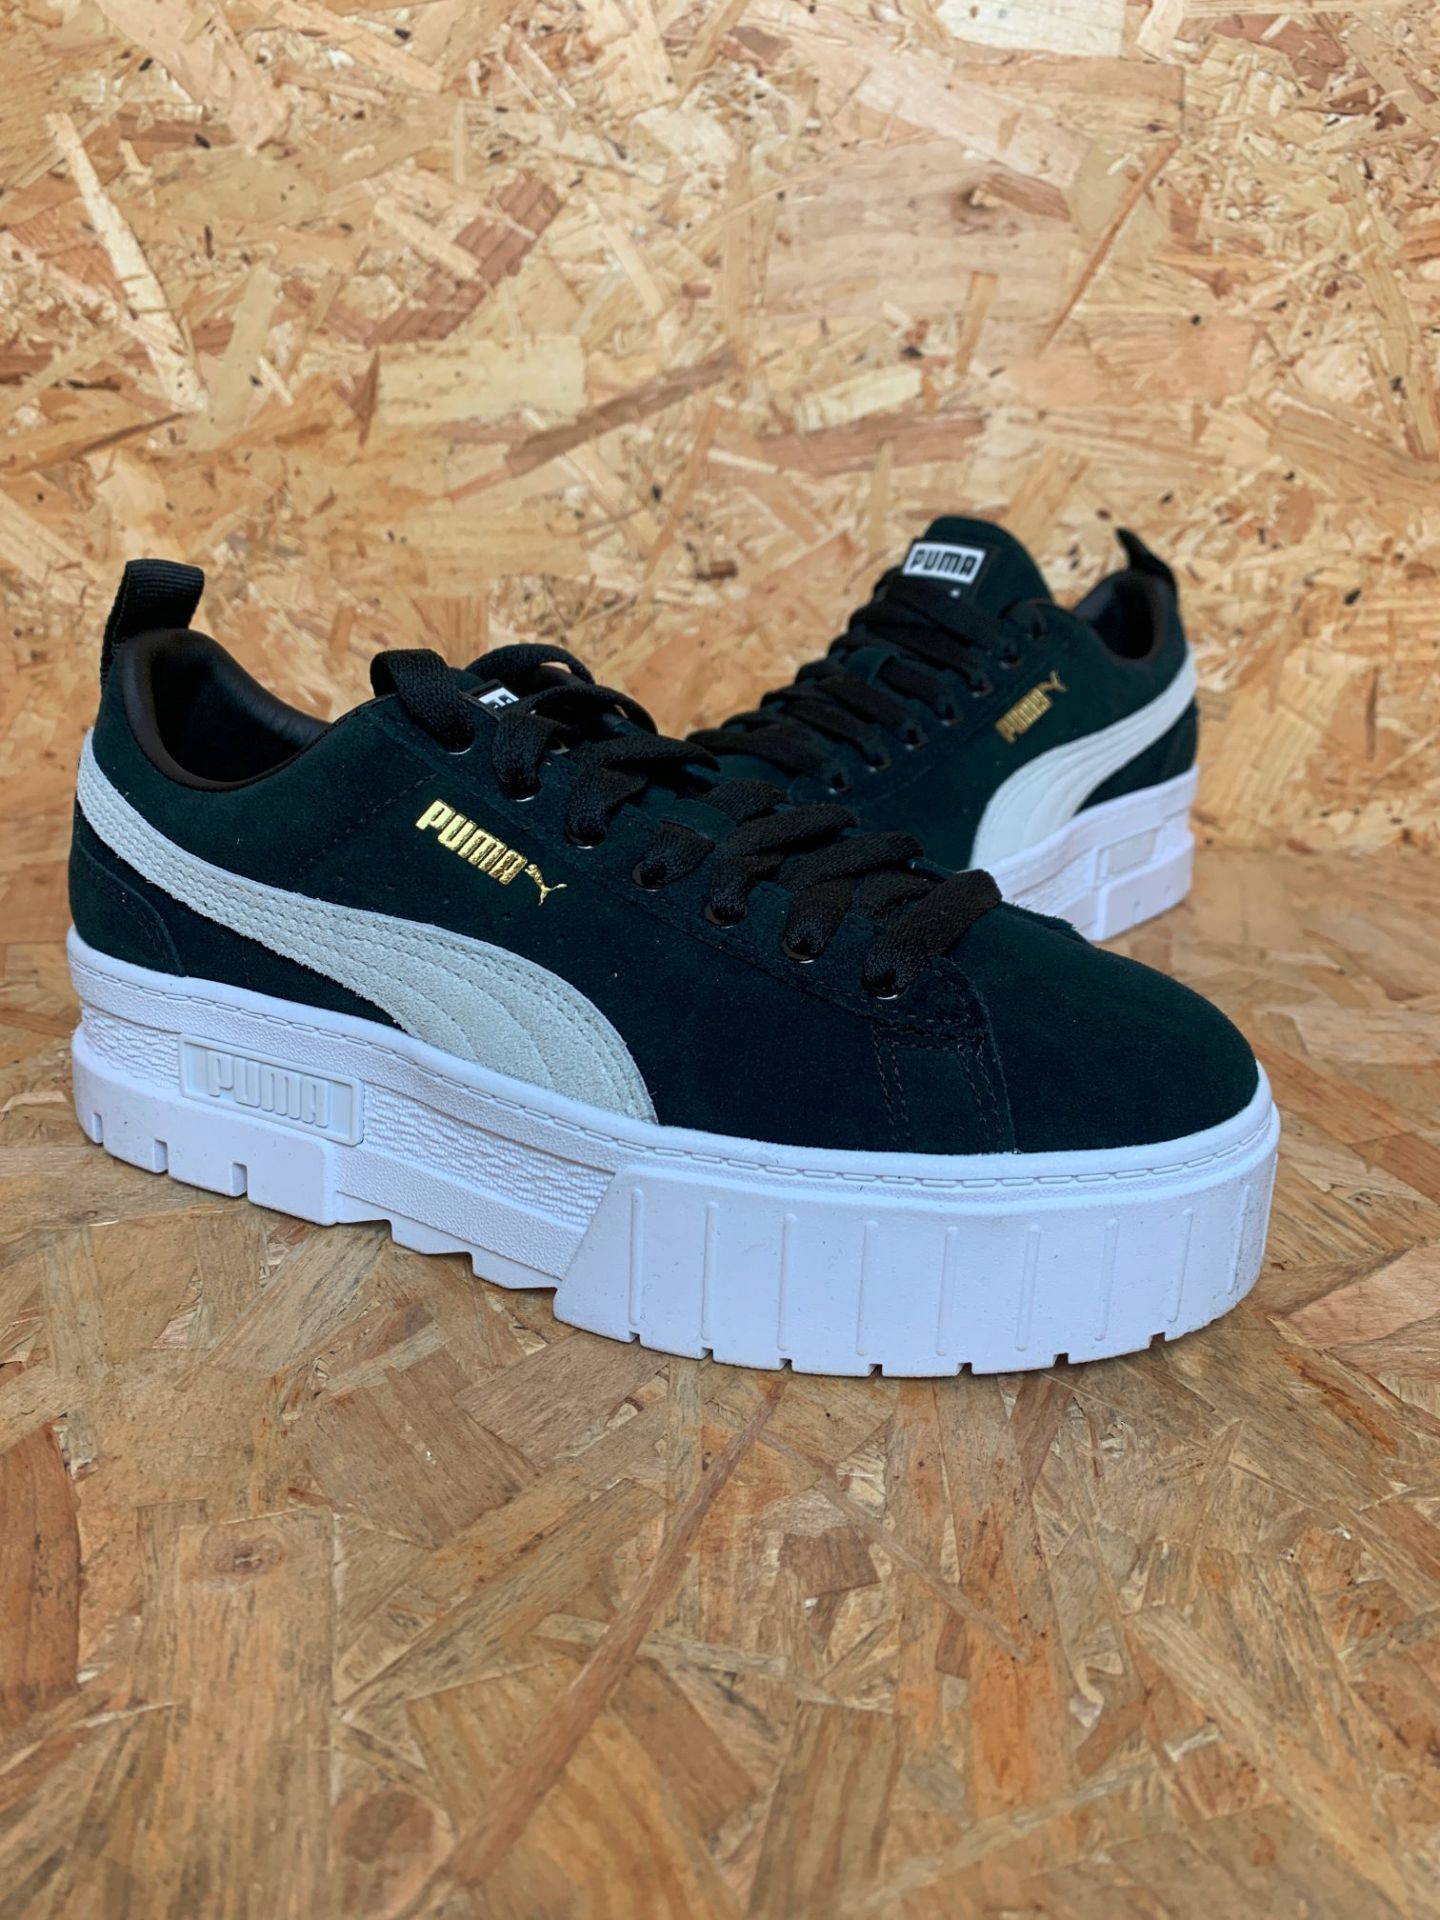 1 x PAIR OF PUMA MAYZE SUEDE TRAINERS / SIZE 5 / RRP £90.00 / CUSTOMER RETURN - GRADE A